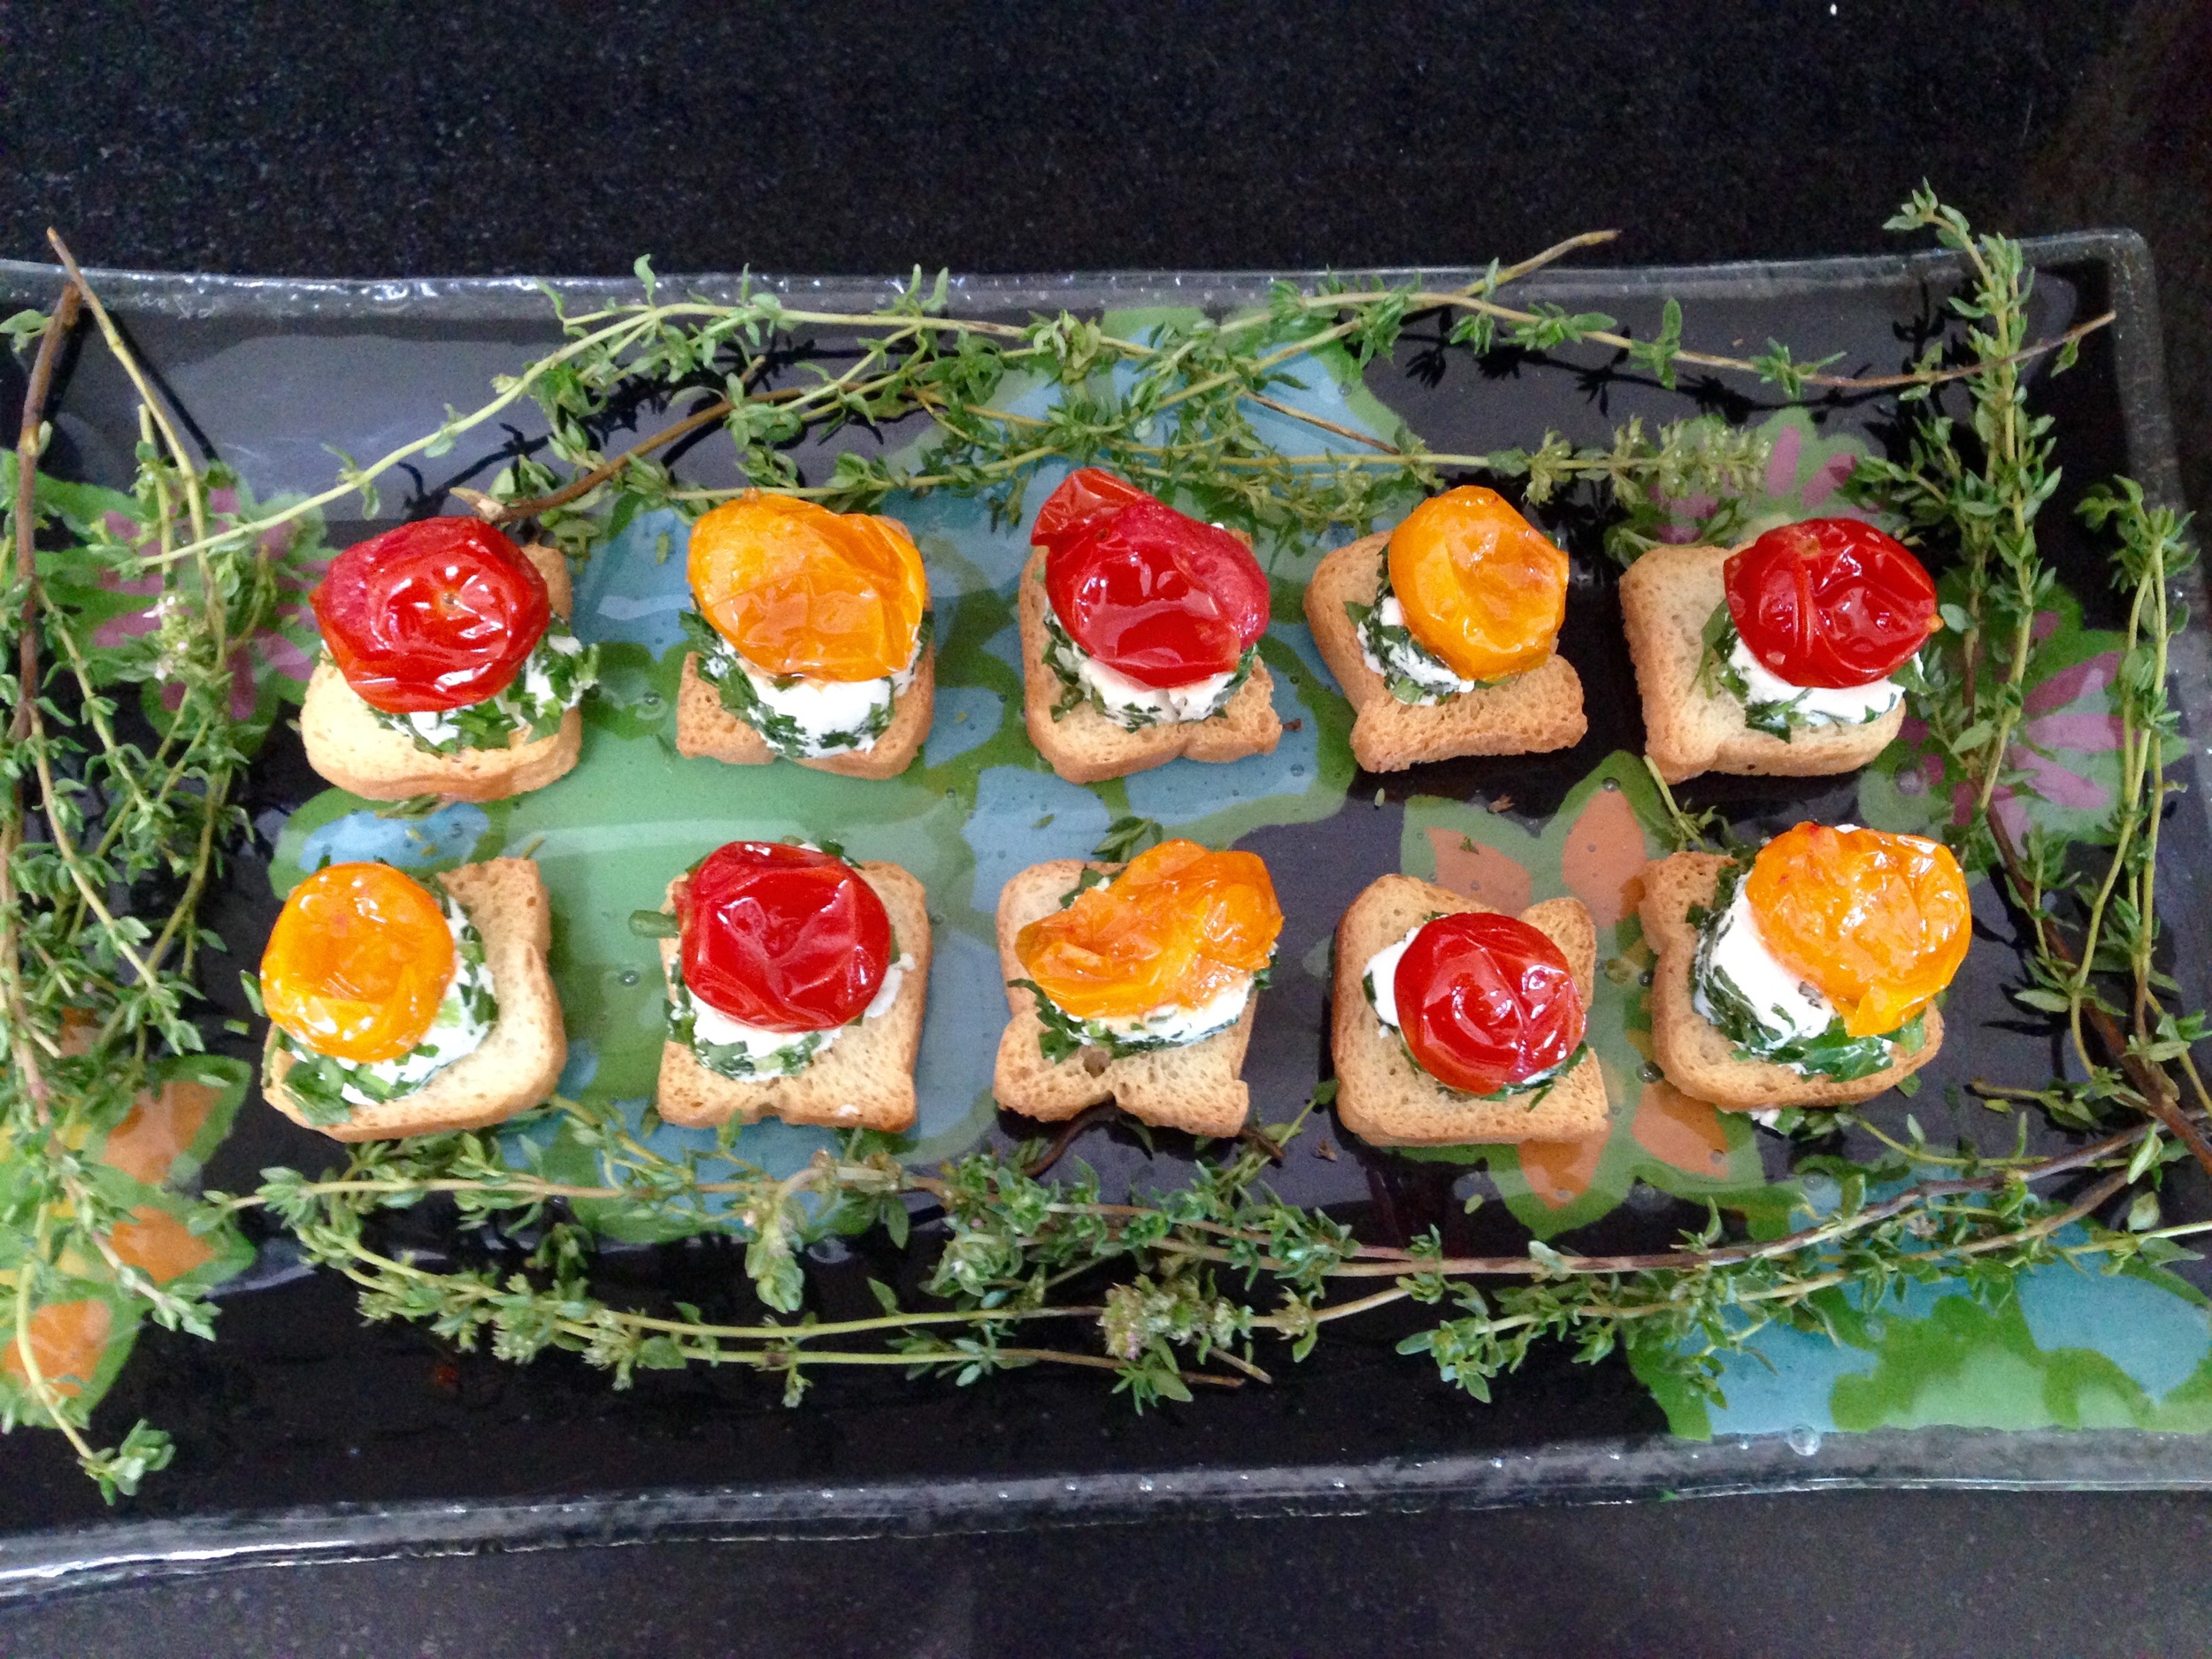 Herbed goat cheese with roasted tomato crostini